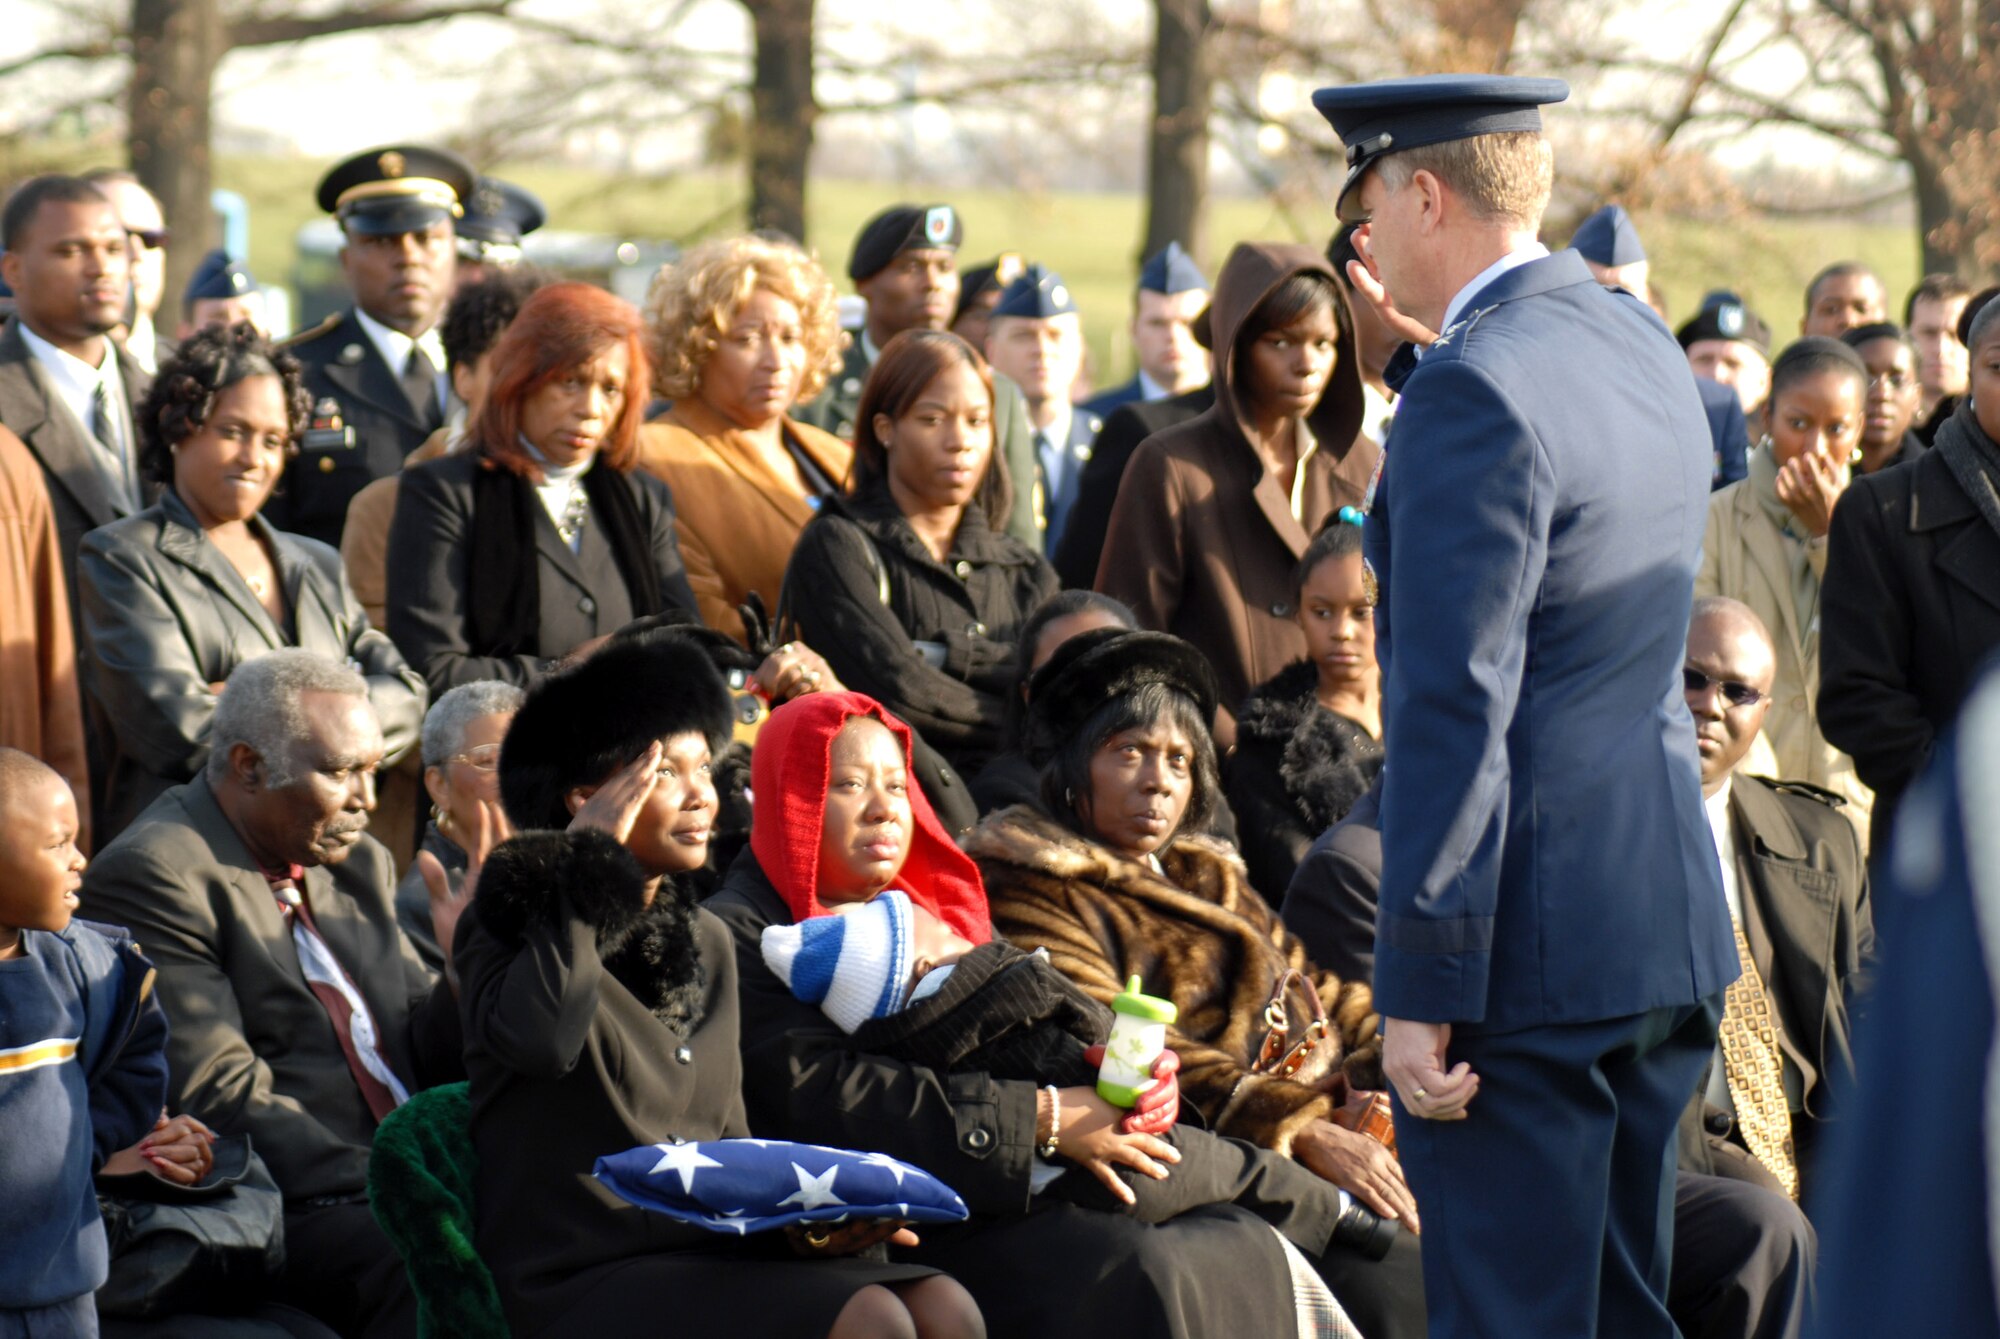 After the flag is handed to the next of kin, the final salute is rendered in honor of Capt. Kermit Evans and returned by Perneatha Evans, his wife, at a funeral Dec. 12 at Arlington National Cemetary. Captain Evans was killed in an emergency helicopter landing Dec. 3 near the shore of Lake Qadisiyah in Al Anbar Province, Iraq. Captain Evans was one of 16 people aboard the Marine CH-46 helicopter and one of four servicemembers killed as a result of the landing. He is survived by his wife and 13-month-old son, Kermit Jr. Captain Evans was the commander of the 27th Civil Engineer Squadron Explosives Ordnance Disposal Flight at Cannon Air Force Base, N.M. (U.S. Air Force photo/David Merrick)